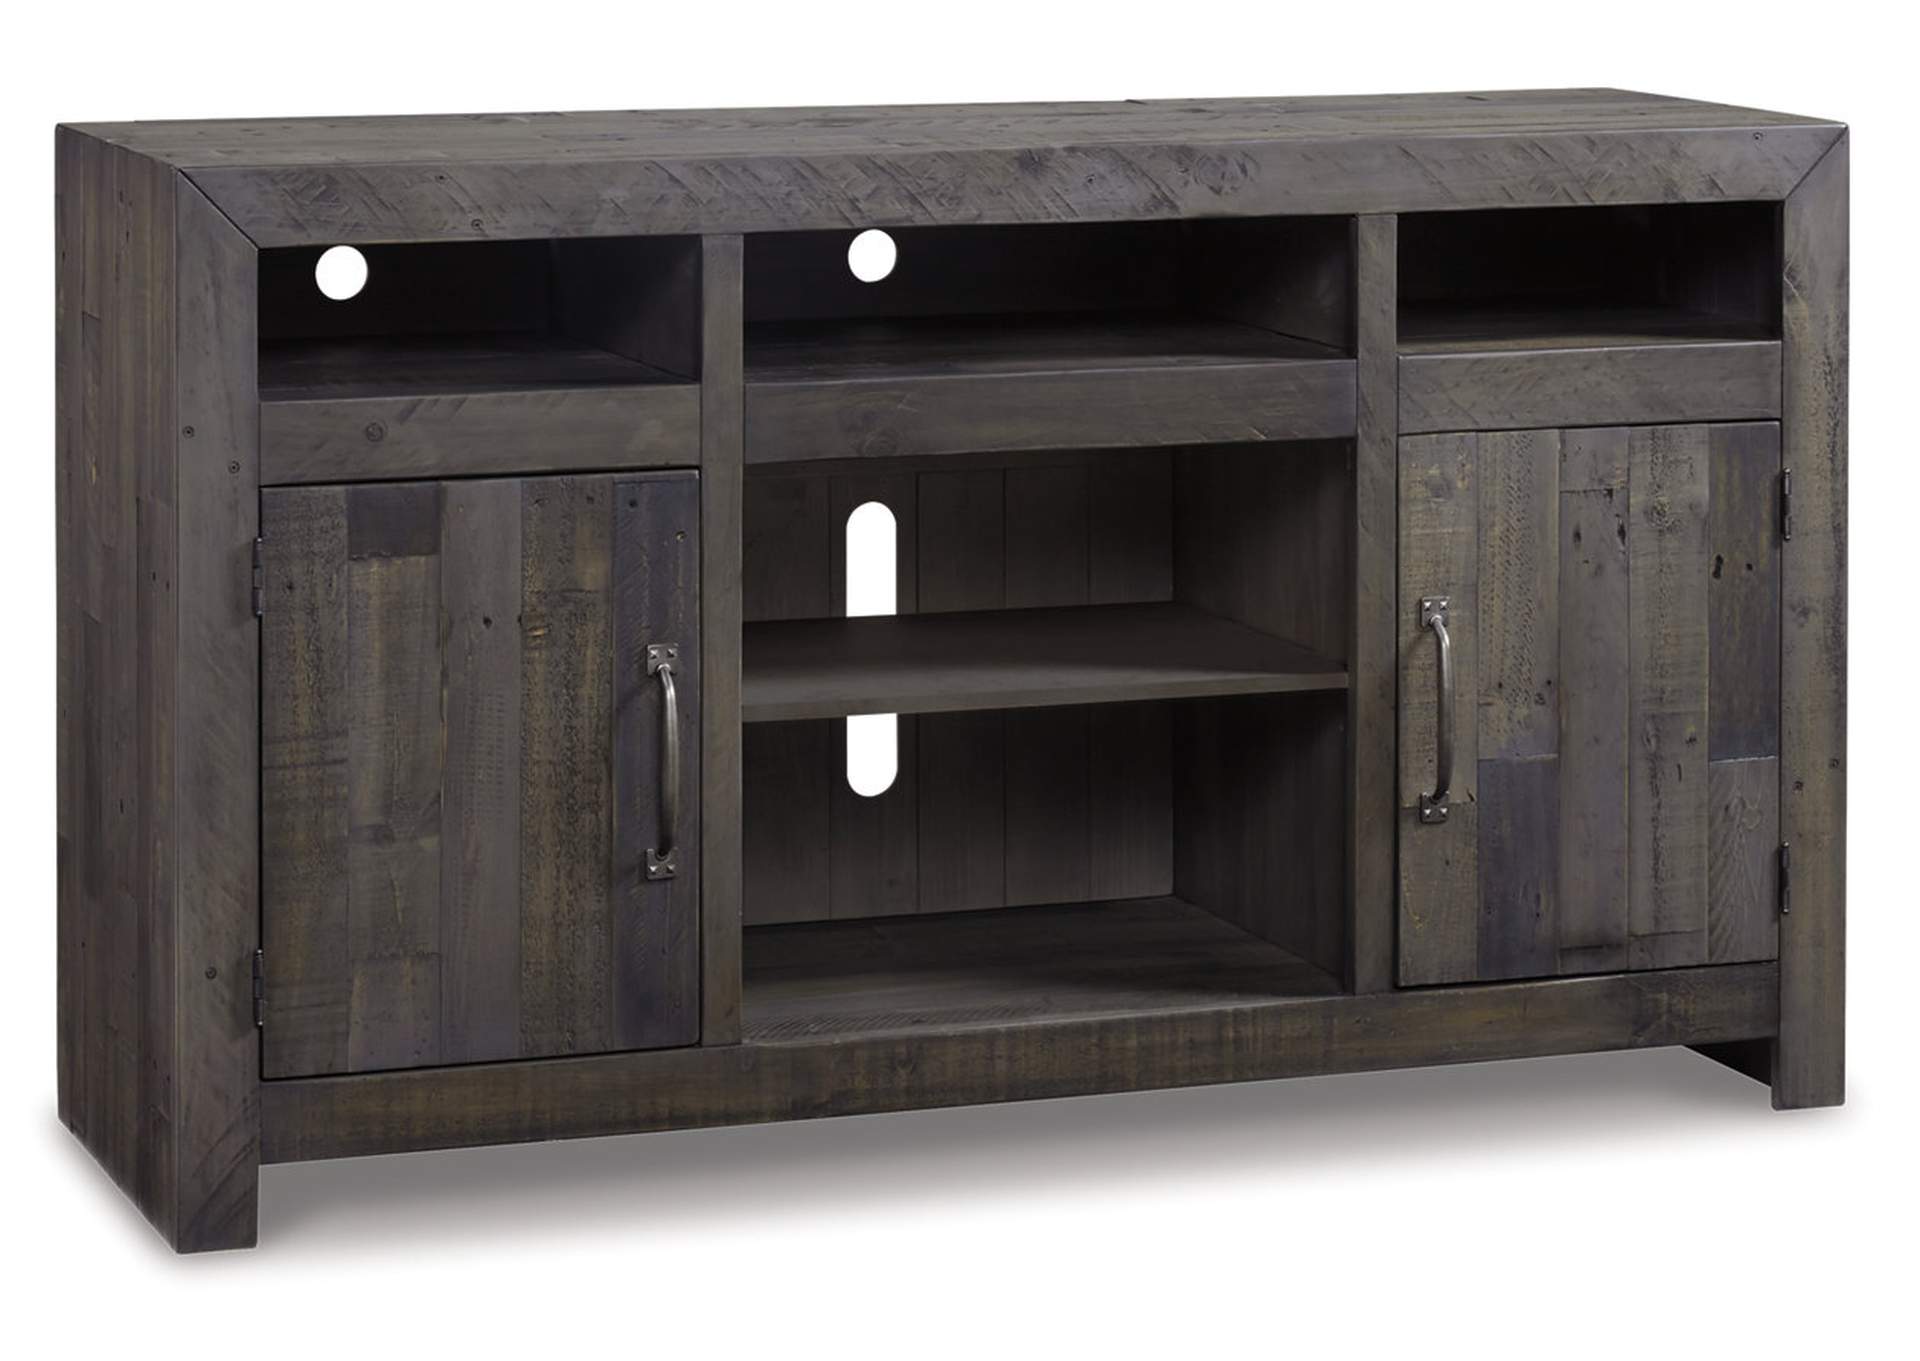 Mayflyn Large TV Stand with Fireplace,Signature Design By Ashley